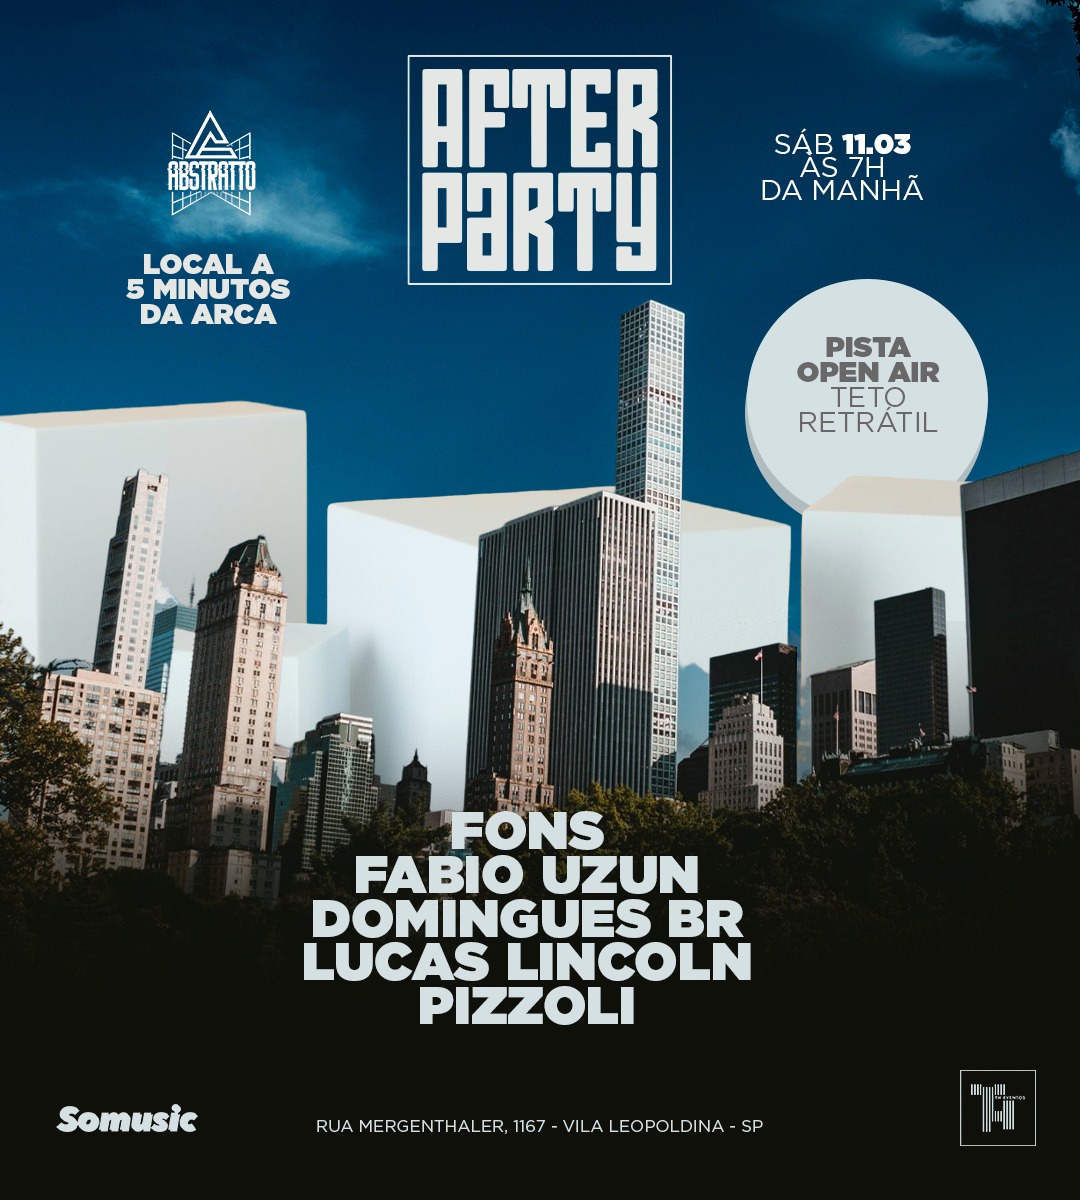 🇧🇷AFTER PARTY - SÃO PAULO